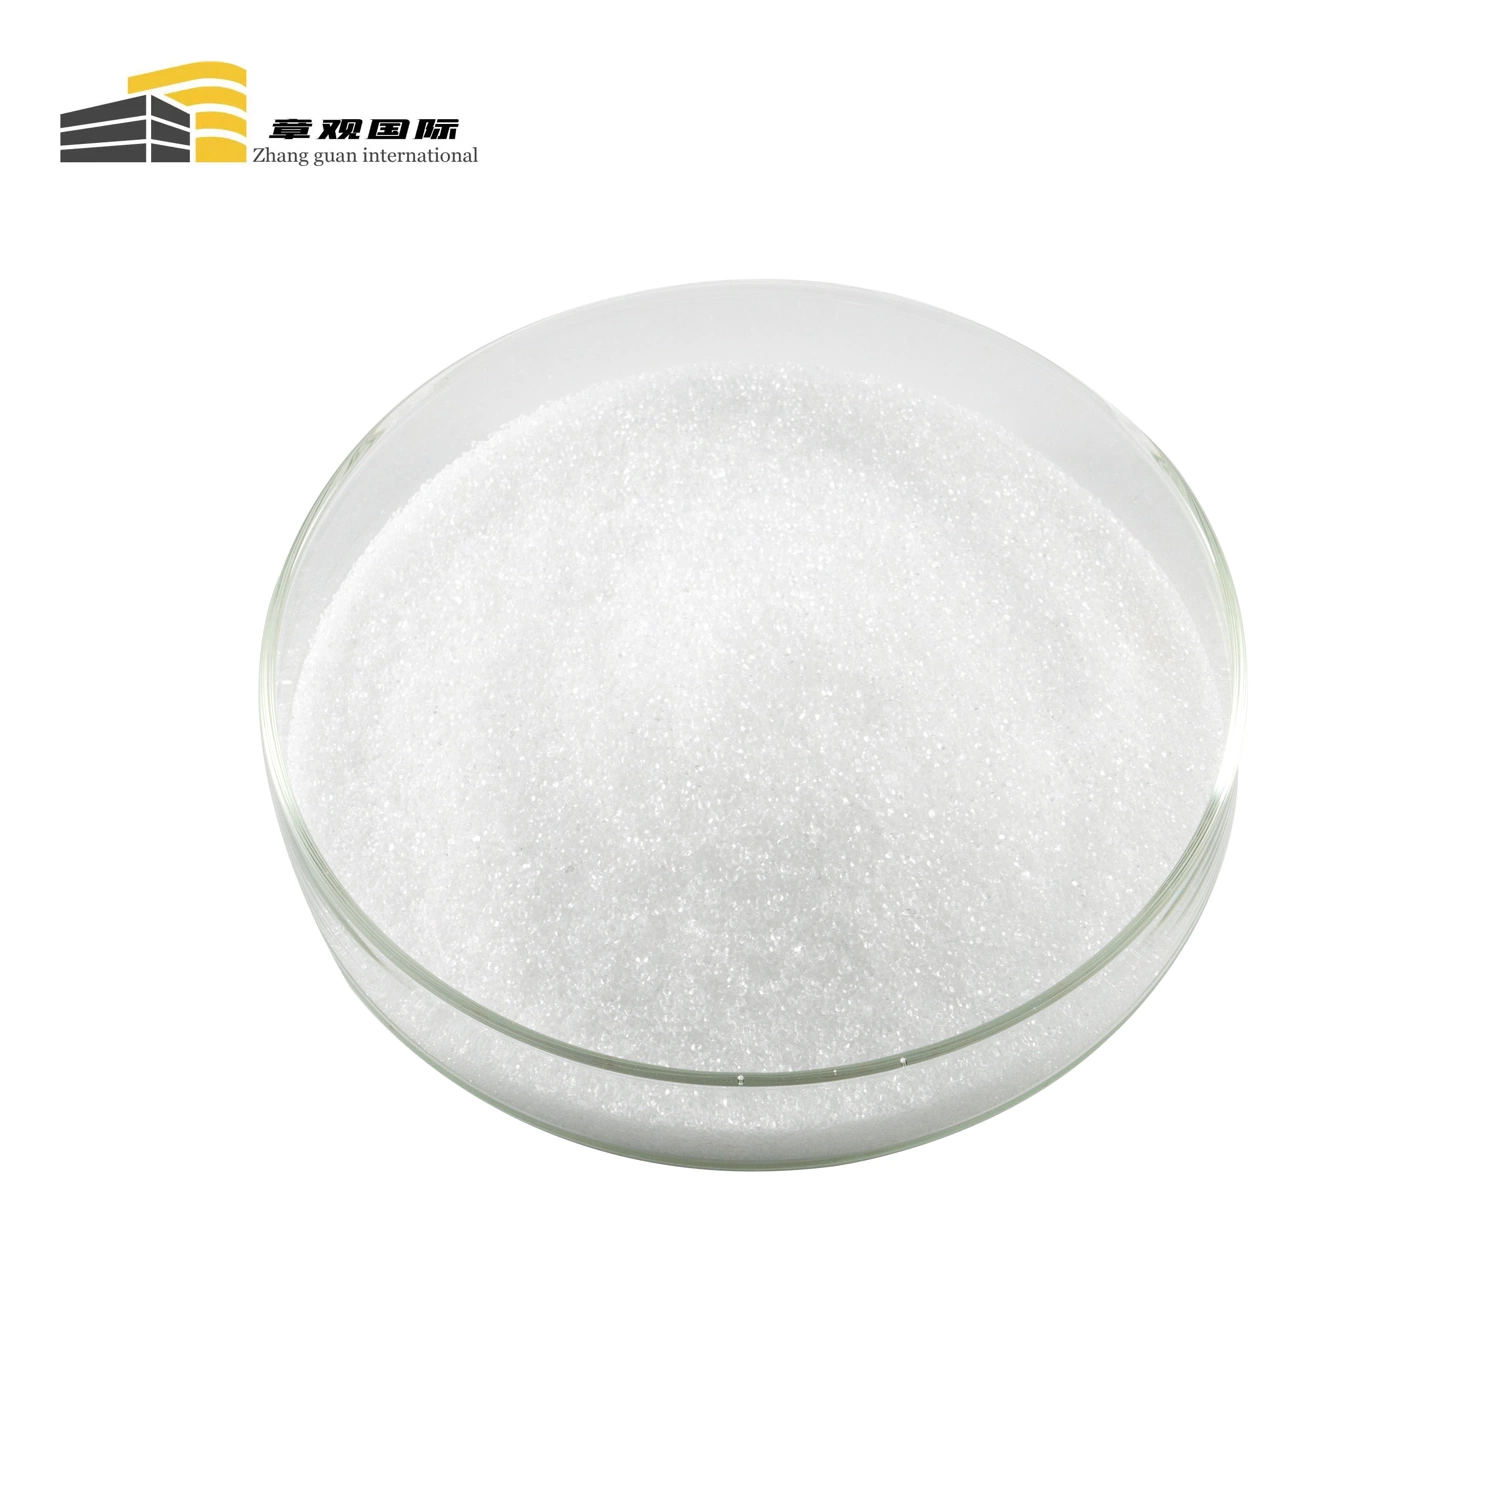 Food Grade D-Mannitol Provides a Low-Calorie Sweetener